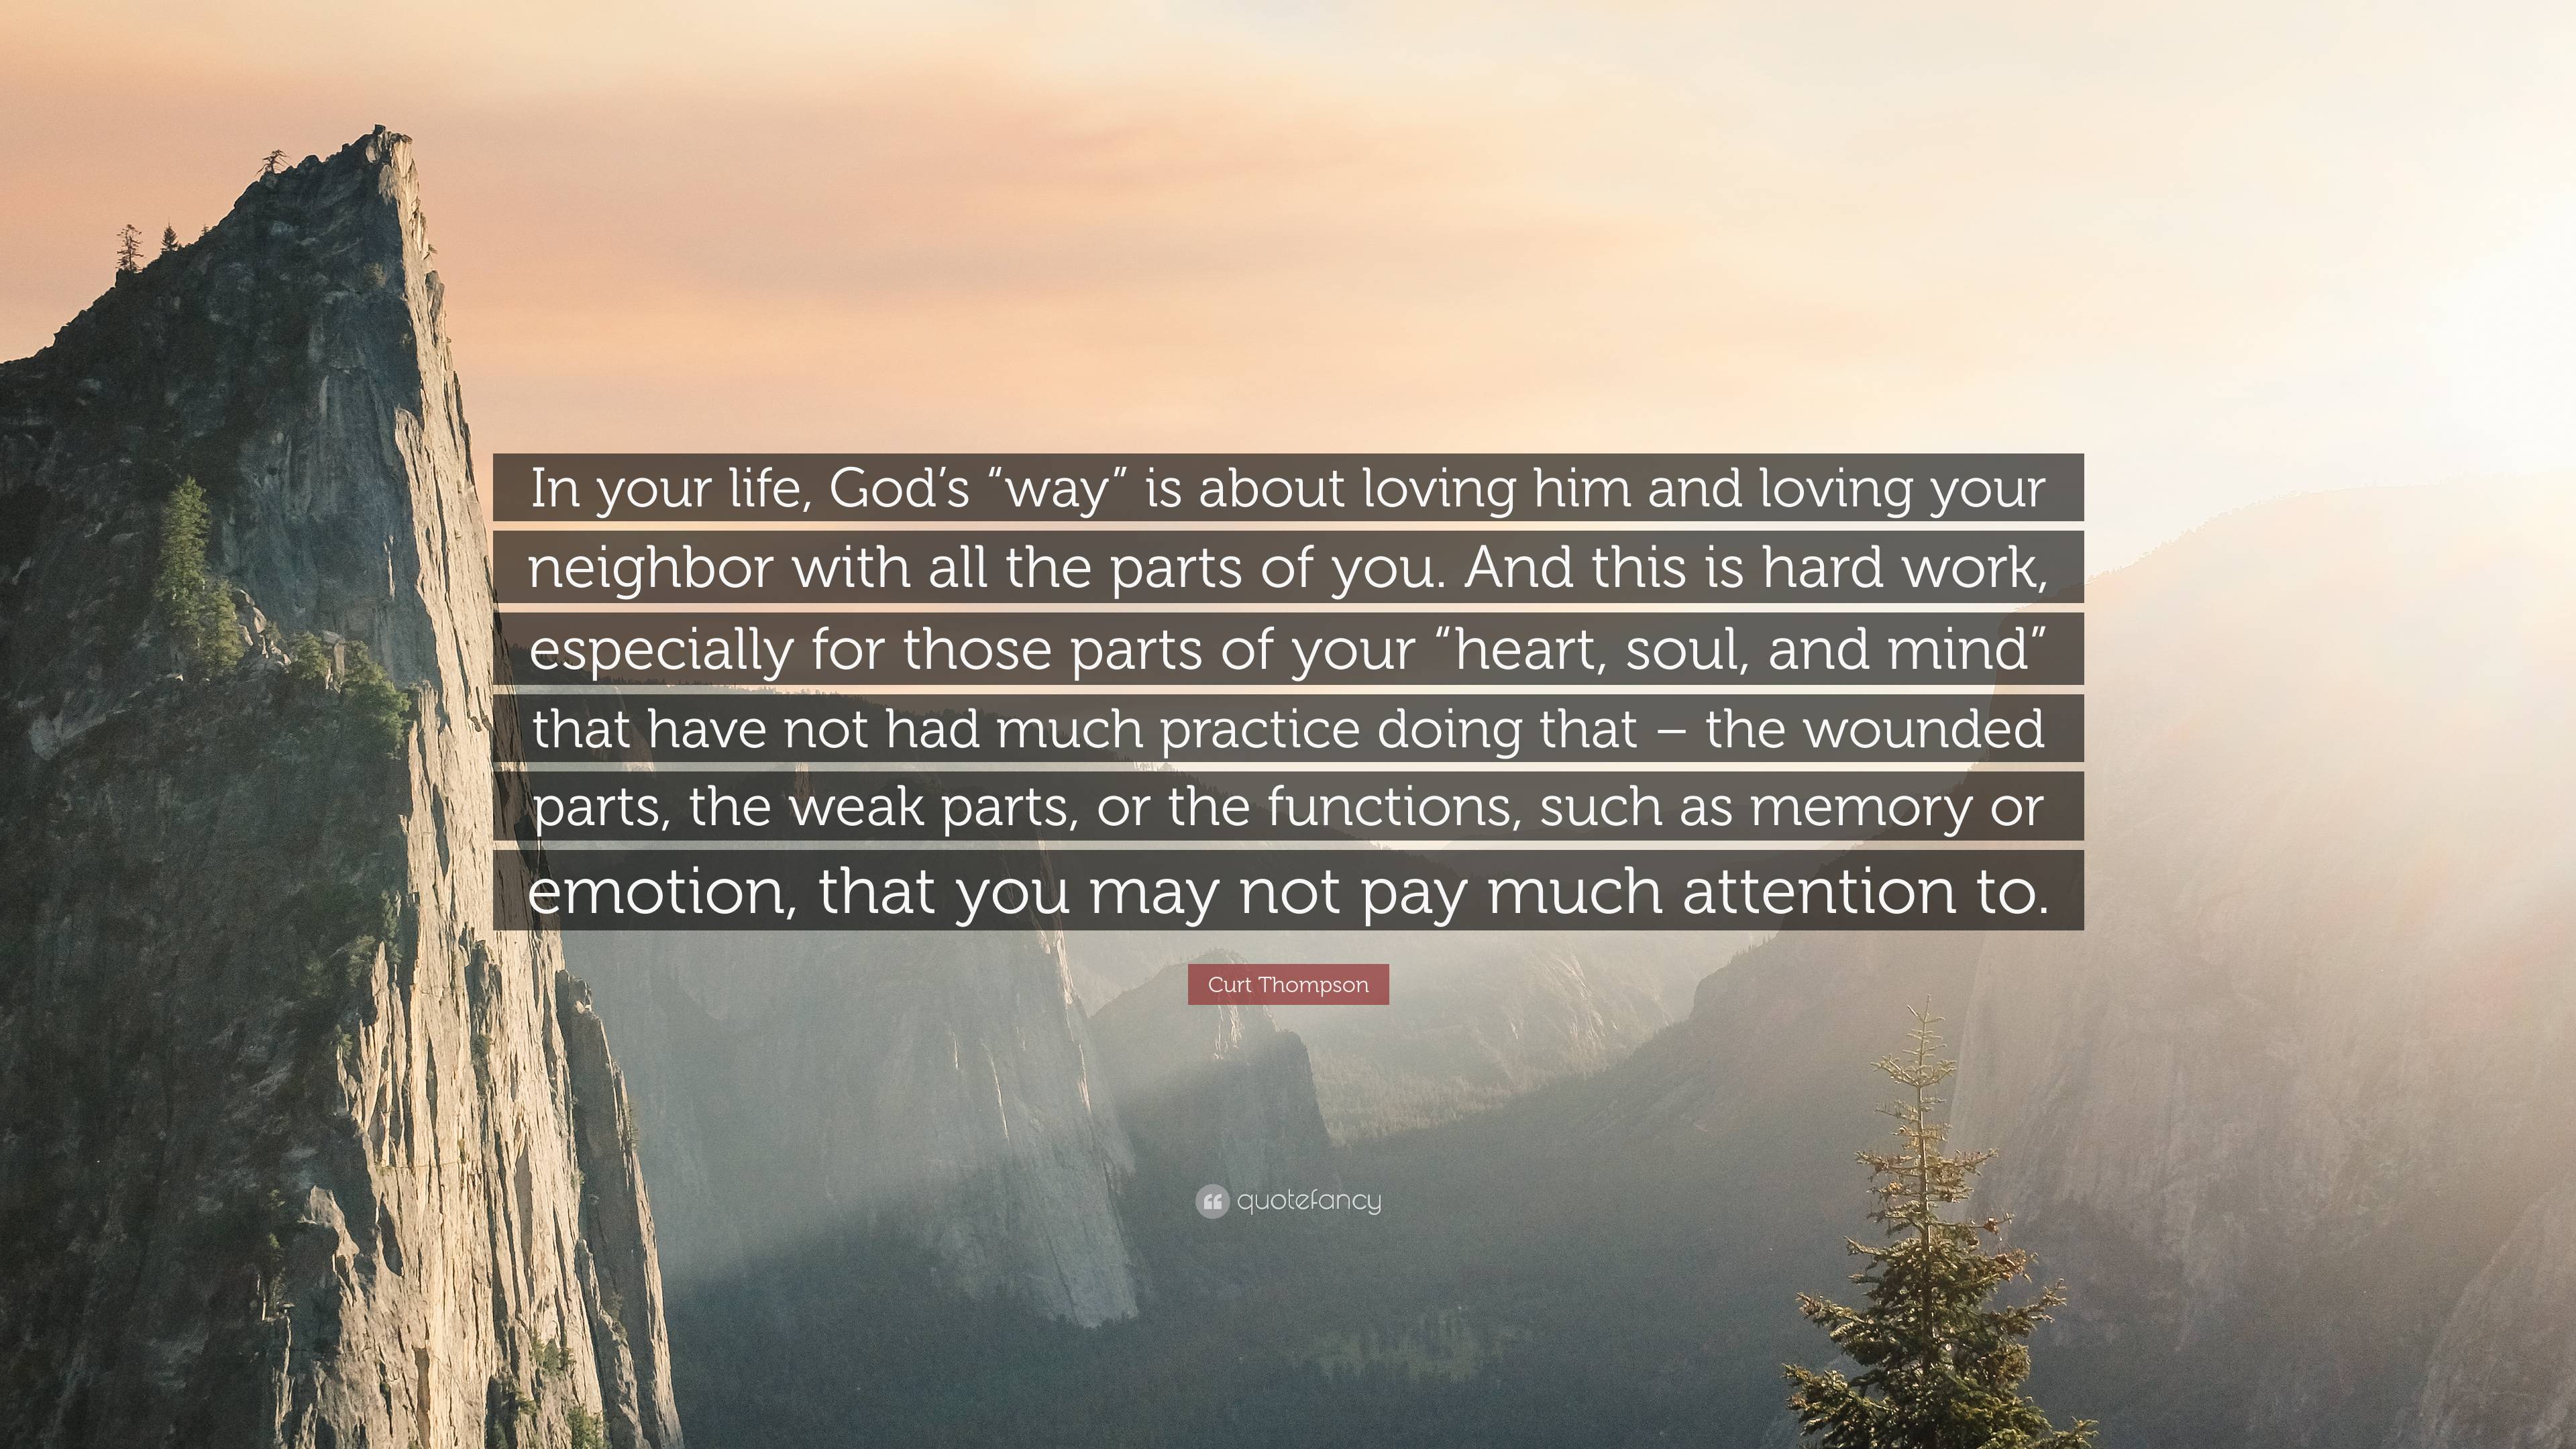 Curt Thompson Quote “In your life, God’s “way” is about loving him and